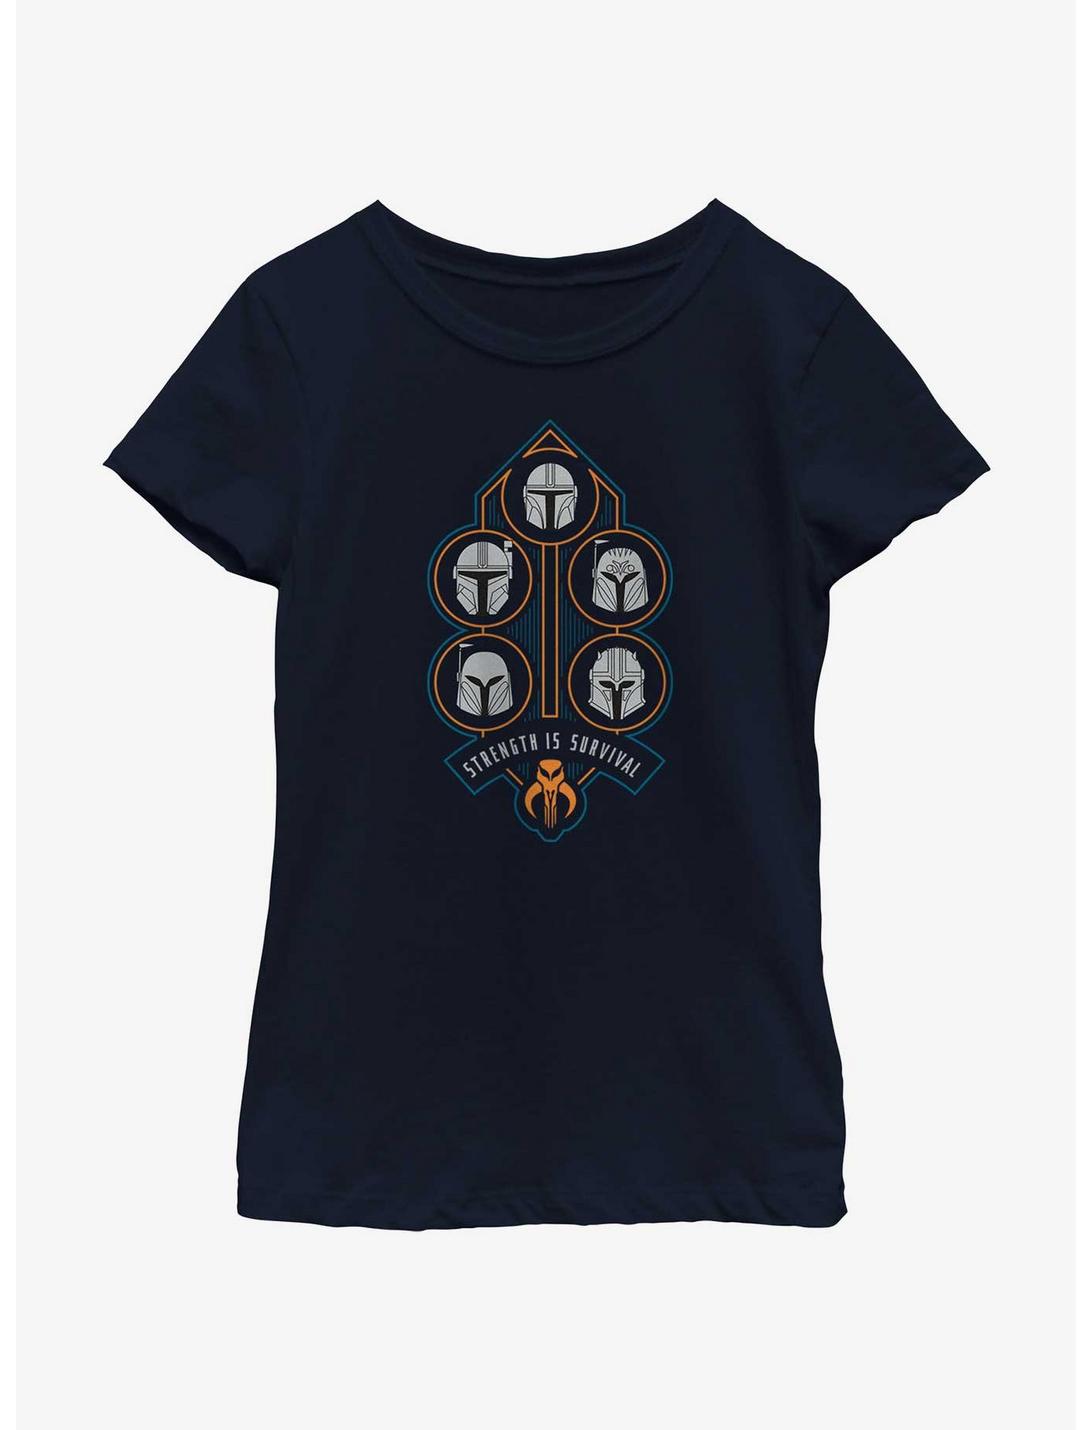 Star Wars The Mandalorian Strength Is Survival Youth Girls T-Shirt, NAVY, hi-res